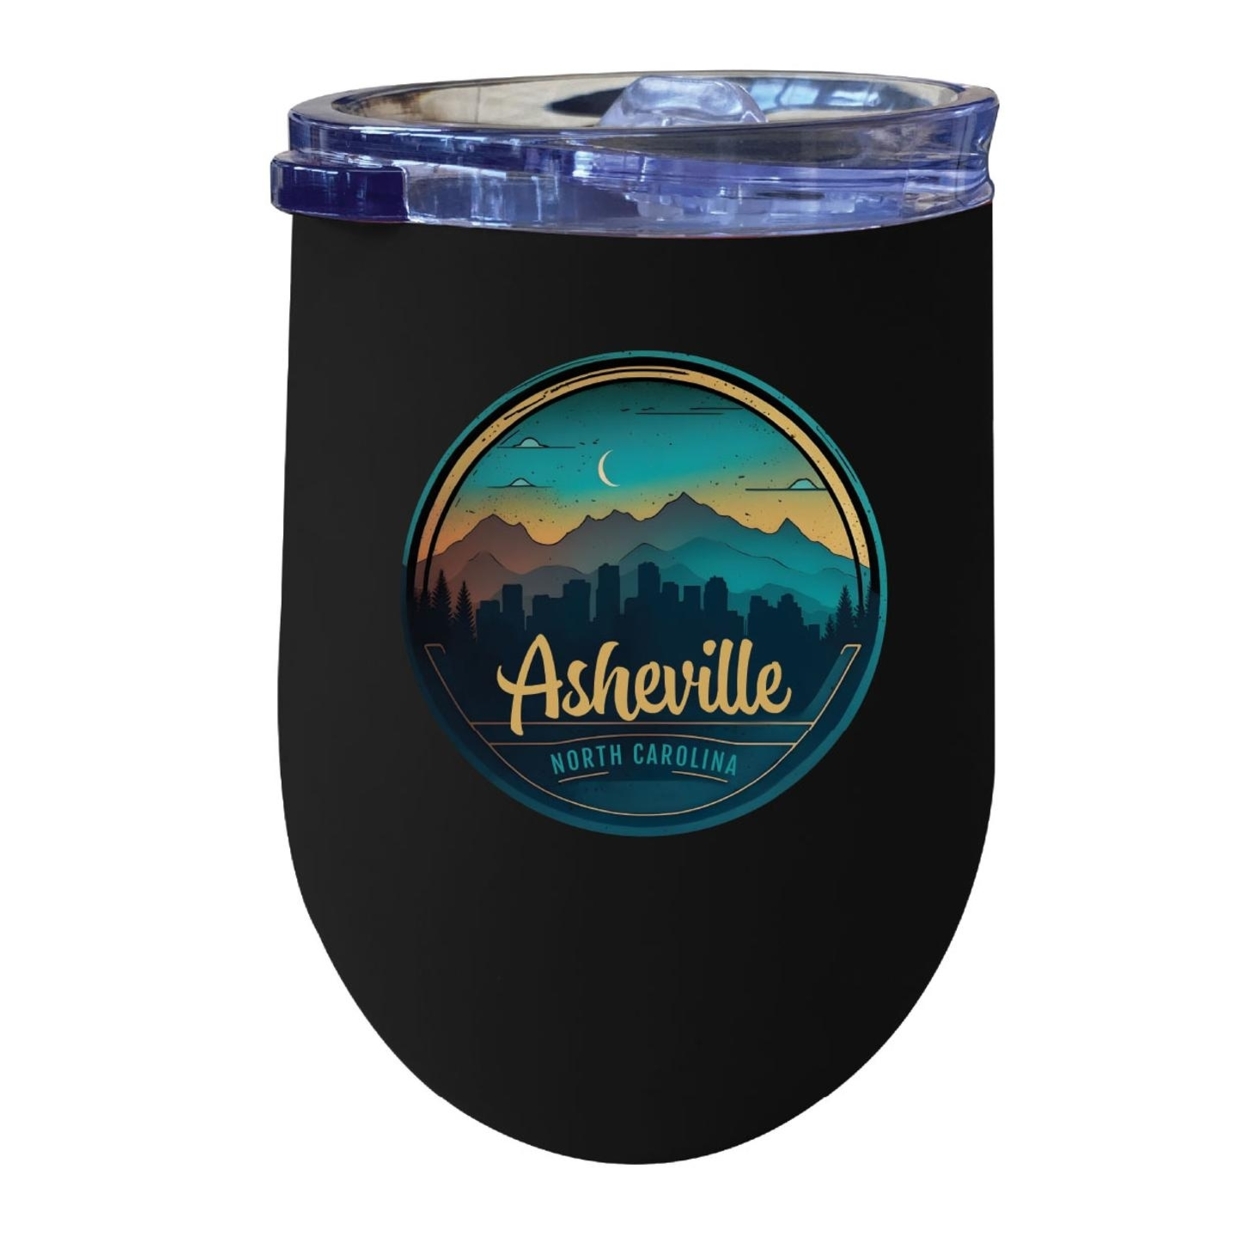 Asheville North Carolina Souvenir 12 Oz Insulated Wine Stainless Steel Tumbler - Navy